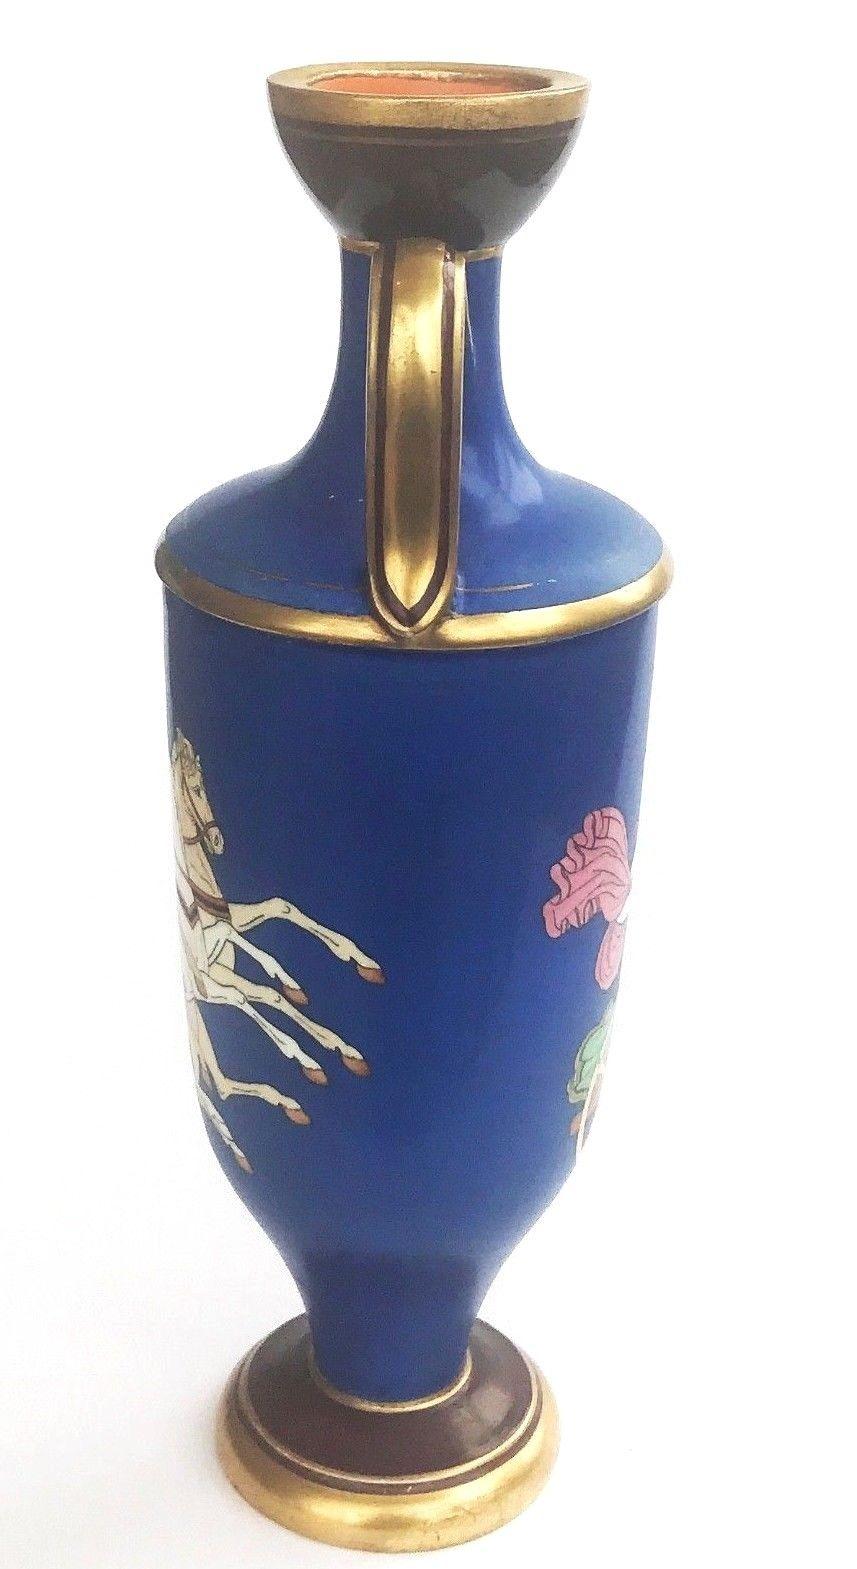 19th Century Samuel Alcock Neo Classical Porcelain Vase In Good Condition In London, United Kindgom